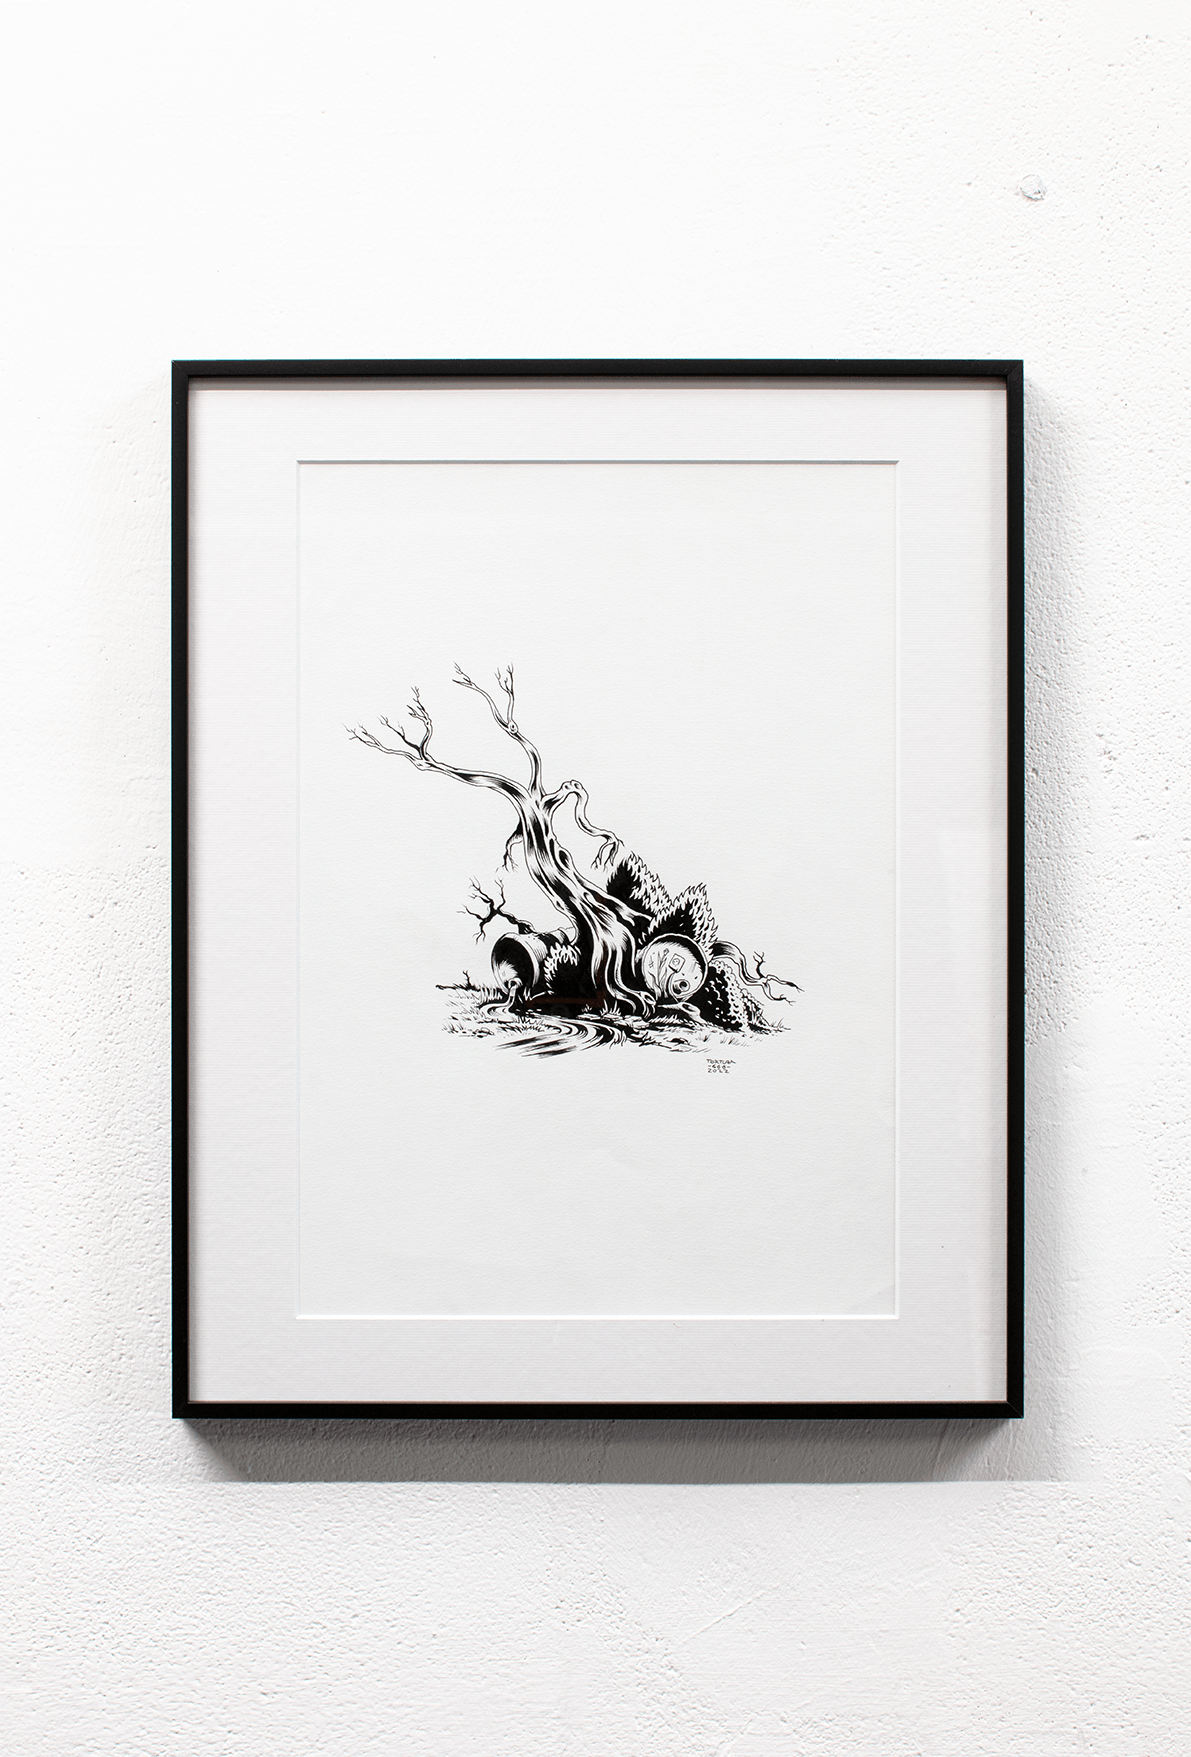 exposition art ILLUSTRATION  Encre acrylic painting canvas pins hossegor Landes oeuvre d'art